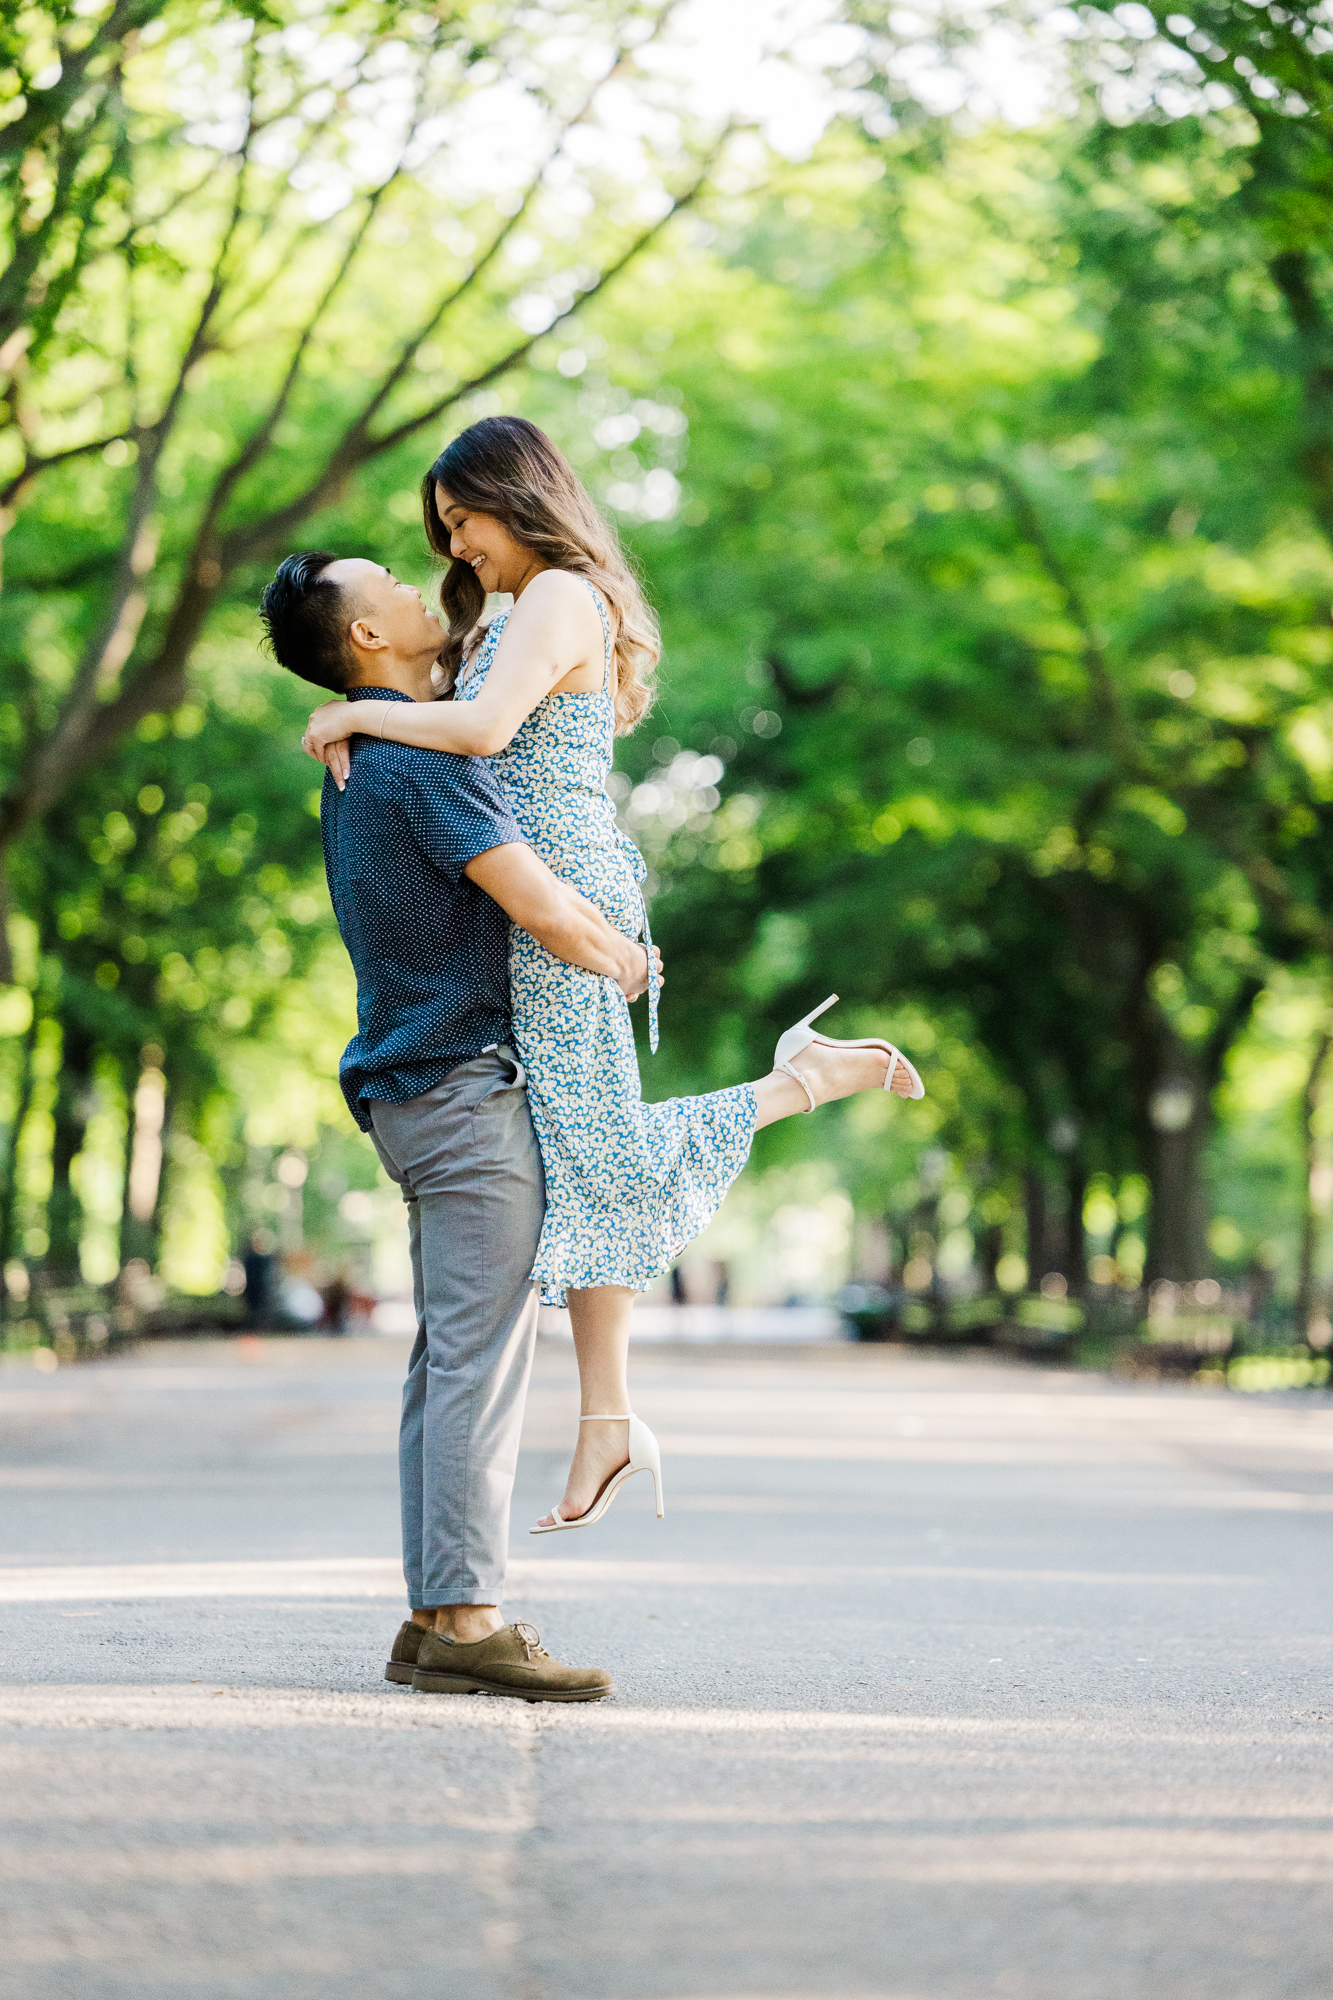 Magical Engagement Photos in Central Park, New York